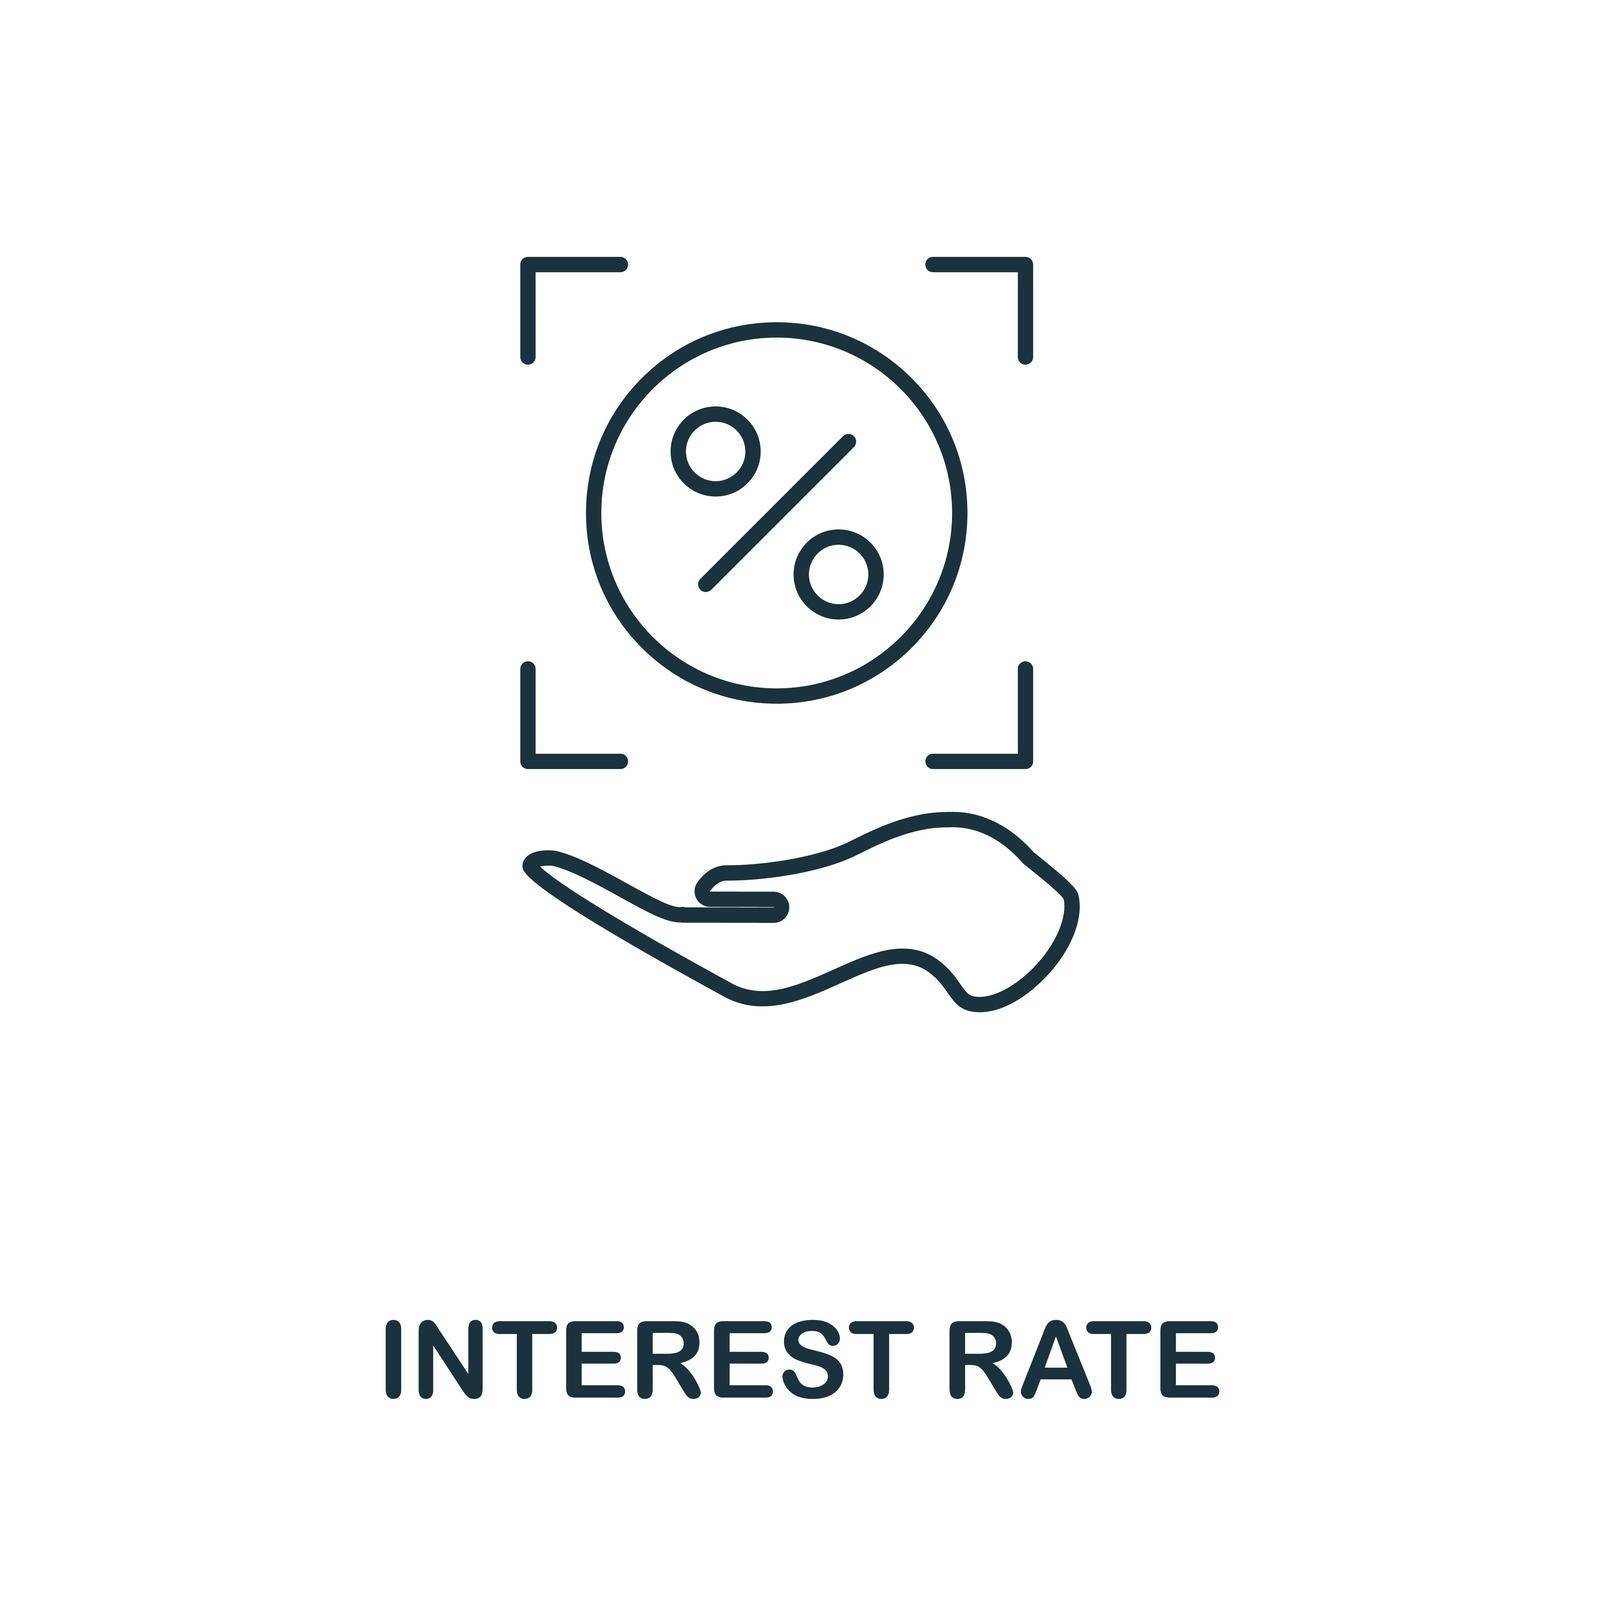 Interest Rate icon. Simple line element interest rate symbol for templates, web design and infographics.